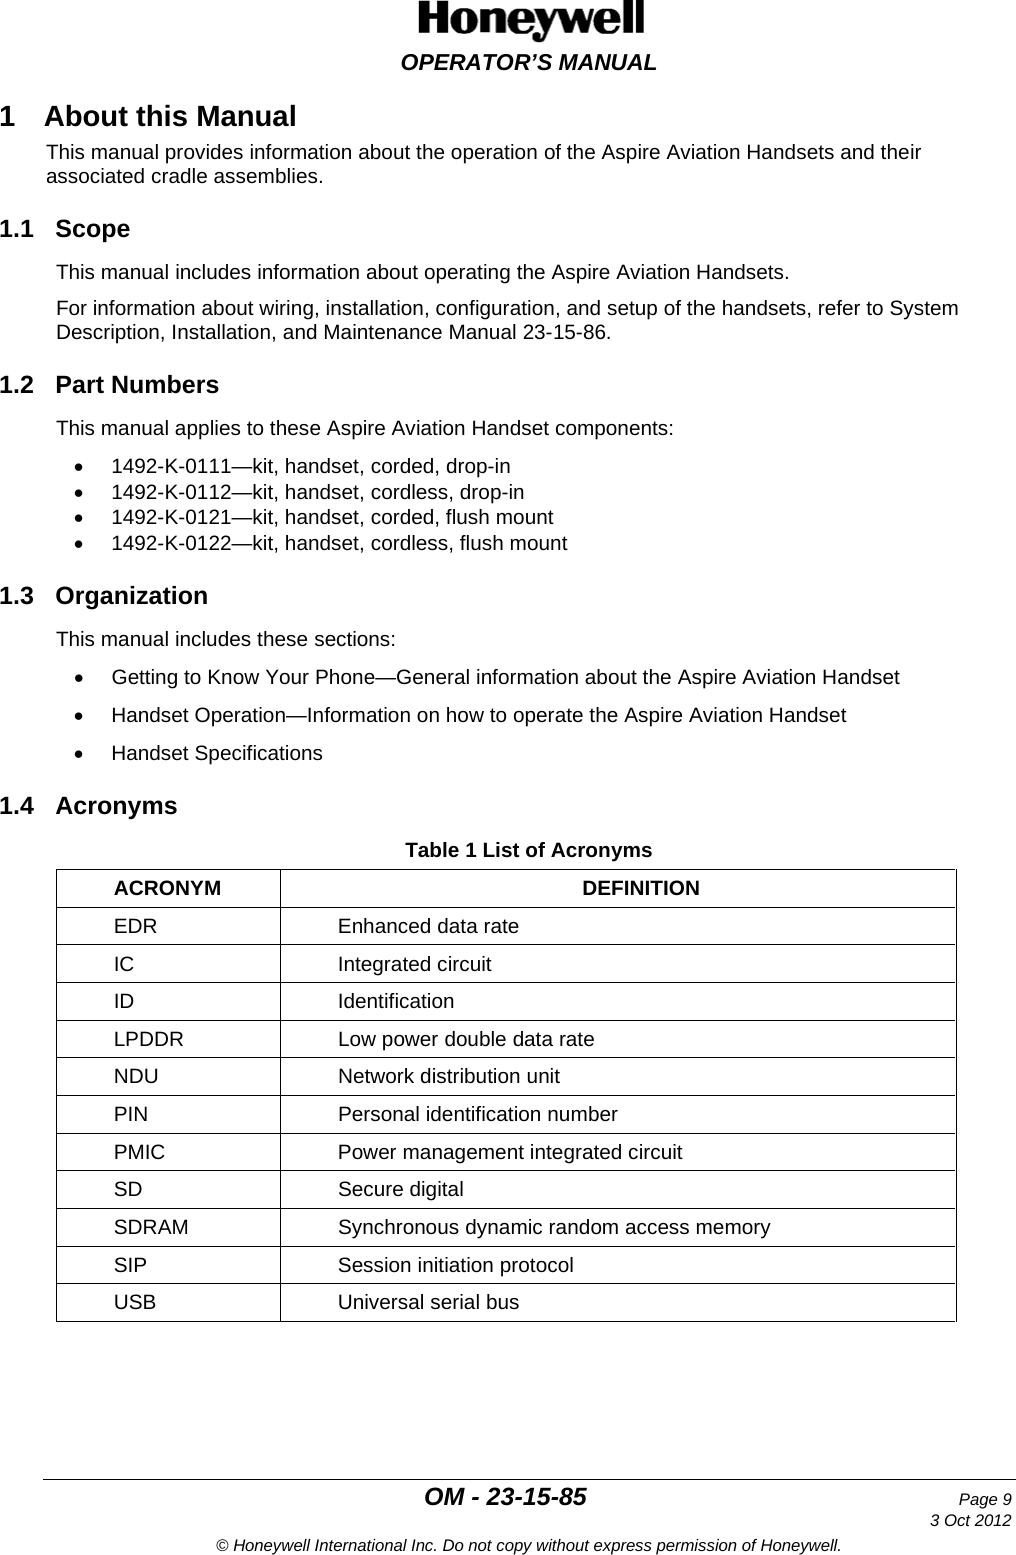  OPERATOR’S MANUAL  OM - 23-15-85 Page 9     3 Oct 2012 © Honeywell International Inc. Do not copy without express permission of Honeywell. 1  About this Manual This manual provides information about the operation of the Aspire Aviation Handsets and their associated cradle assemblies. 1.1 Scope This manual includes information about operating the Aspire Aviation Handsets. For information about wiring, installation, configuration, and setup of the handsets, refer to System Description, Installation, and Maintenance Manual 23-15-86. 1.2 Part Numbers This manual applies to these Aspire Aviation Handset components: • 1492-K-0111—kit, handset, corded, drop-in • 1492-K-0112—kit, handset, cordless, drop-in • 1492-K-0121—kit, handset, corded, flush mount  • 1492-K-0122—kit, handset, cordless, flush mount 1.3 Organization This manual includes these sections: • Getting to Know Your Phone—General information about the Aspire Aviation Handset • Handset Operation—Information on how to operate the Aspire Aviation Handset • Handset Specifications 1.4 Acronyms Table 1 List of Acronyms ACRONYM DEFINITION EDR Enhanced data rate IC Integrated circuit ID Identification LPDDR Low power double data rate NDU Network distribution unit PIN Personal identification number PMIC Power management integrated circuit SD Secure digital SDRAM Synchronous dynamic random access memory SIP Session initiation protocol USB Universal serial bus 